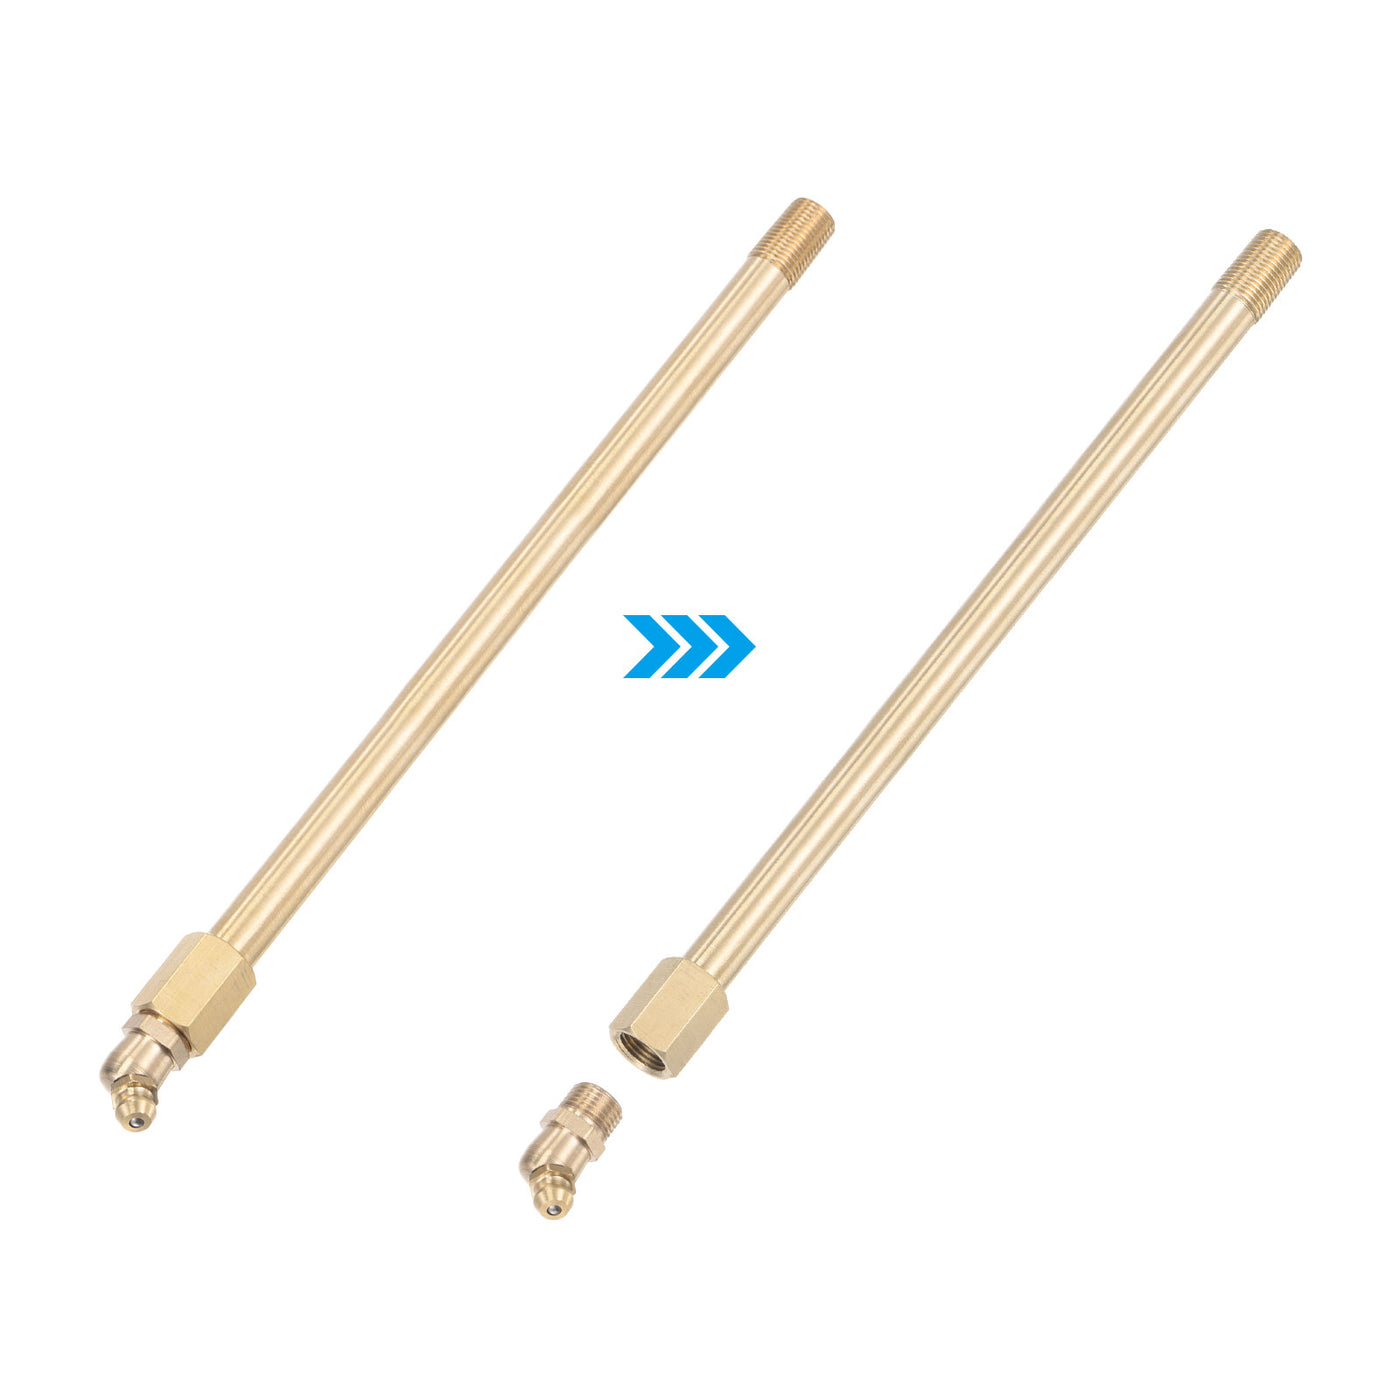 uxcell Uxcell Brass Straight Hydraulic Grease Fitting G1/8 Thread 215mm Length